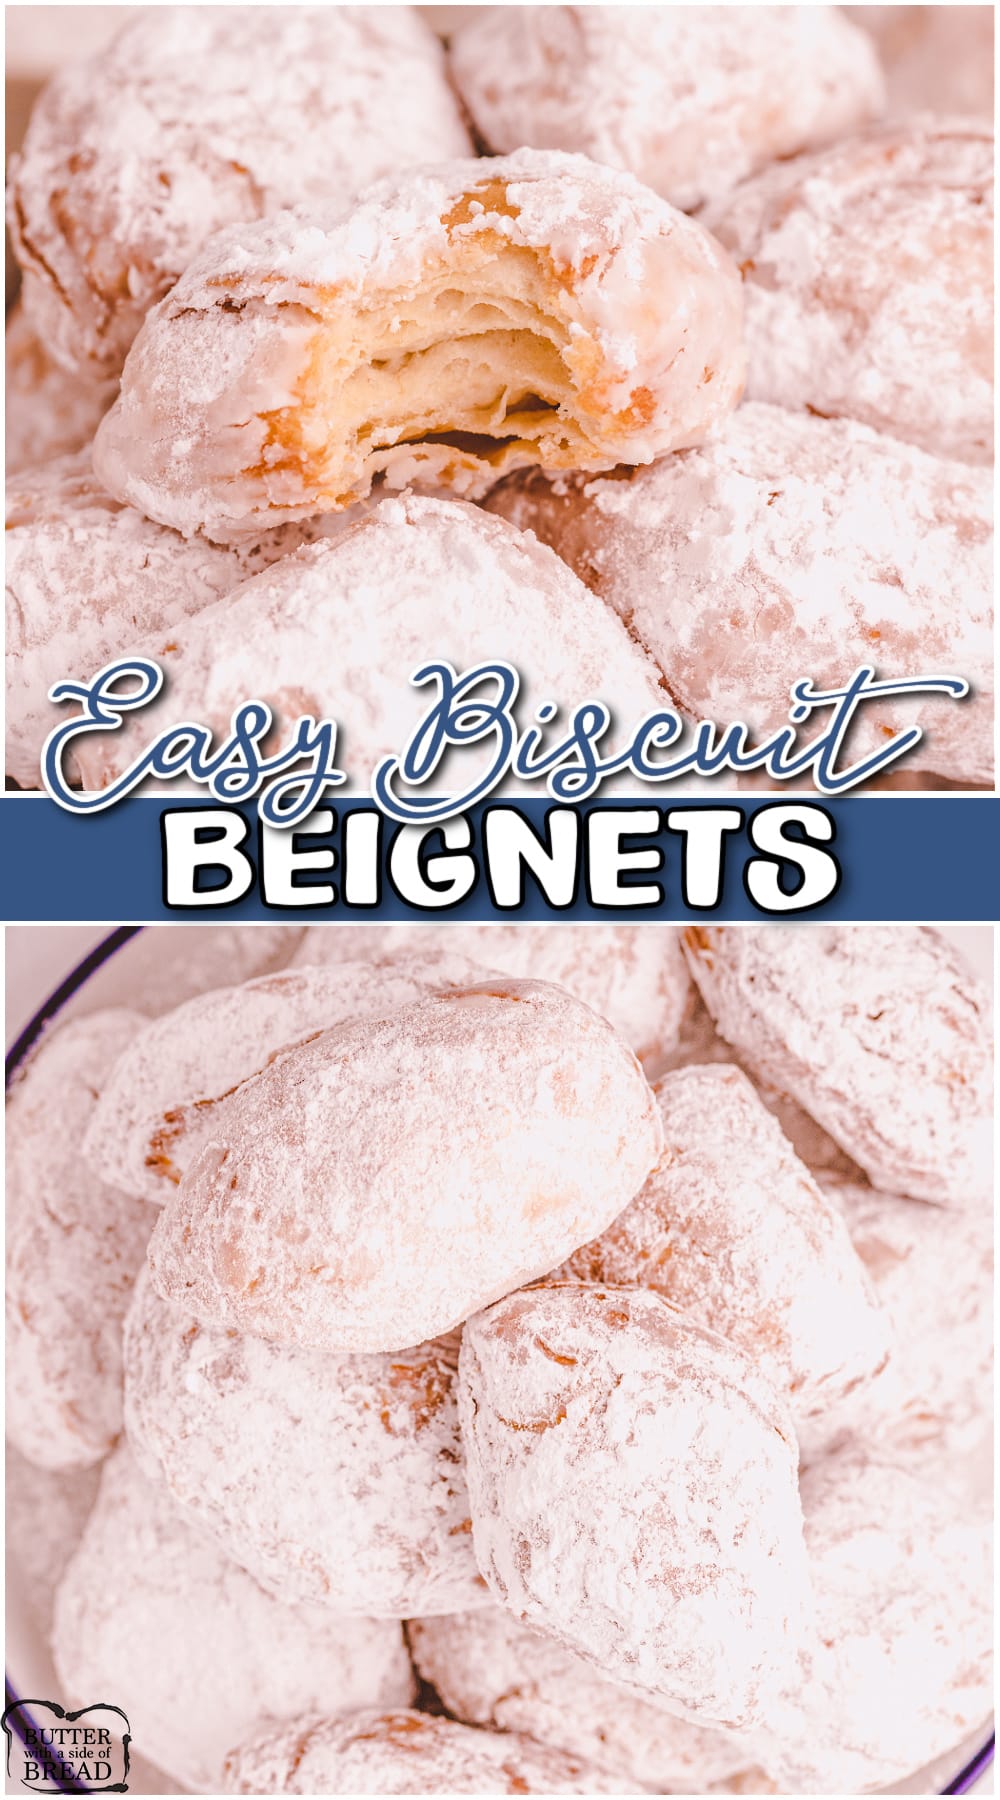 Easy Biscuit Beignets are simply made with just a few ingredients in minutes! Tender, sweet beignets with biscuits are fried, covered in powdered sugar & taste incredible!